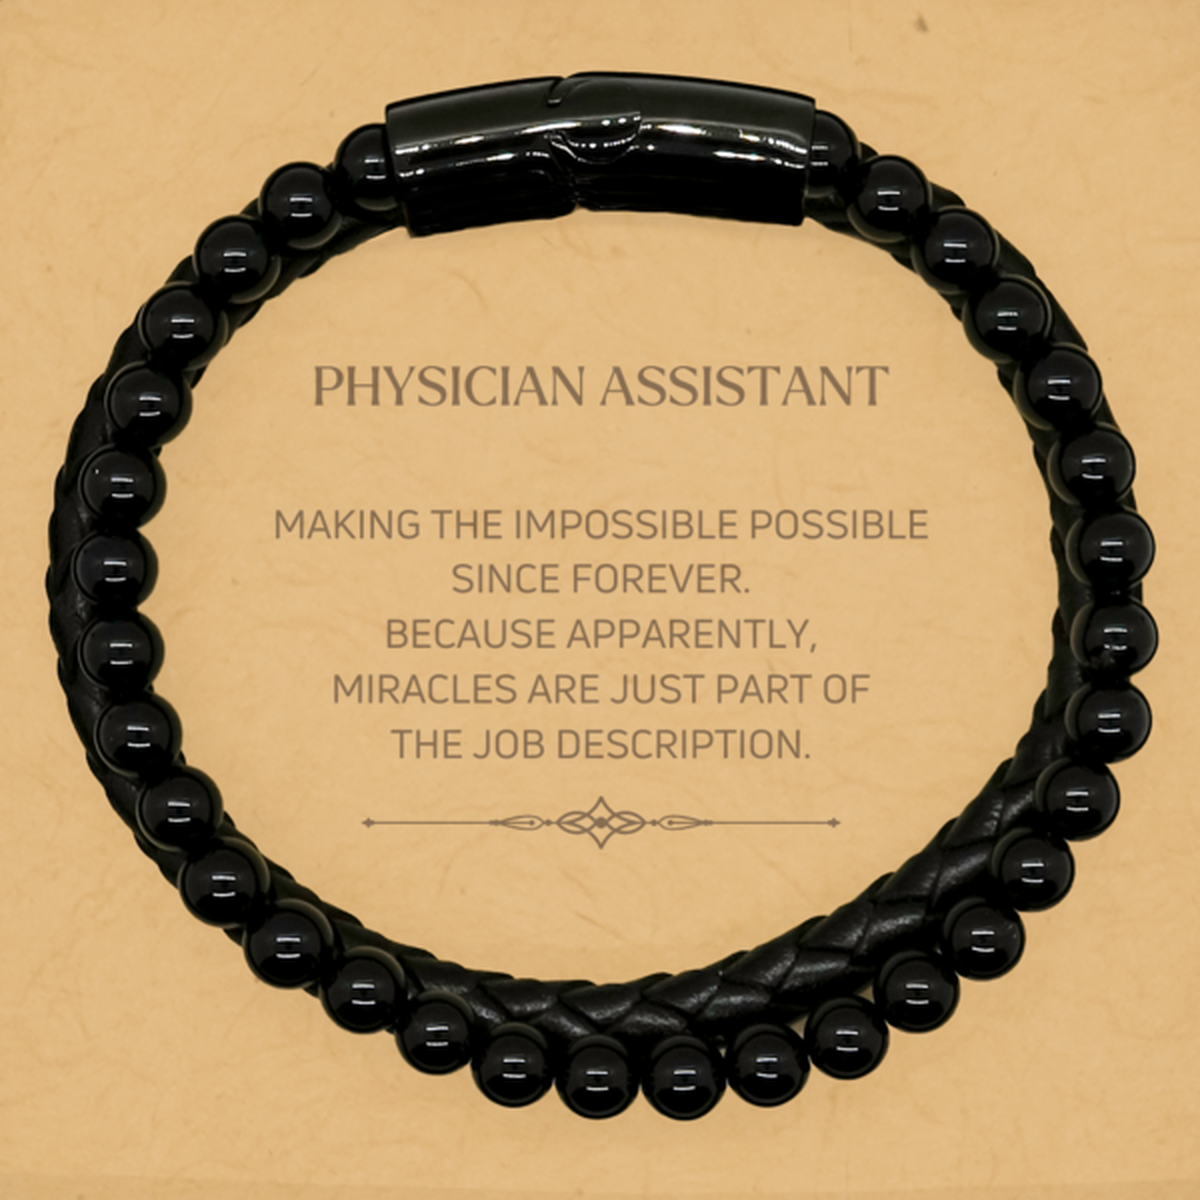 Funny Physician Assistant Gifts, Miracles are just part of the job description, Inspirational Birthday Stone Leather Bracelets For Physician Assistant, Men, Women, Coworkers, Friends, Boss